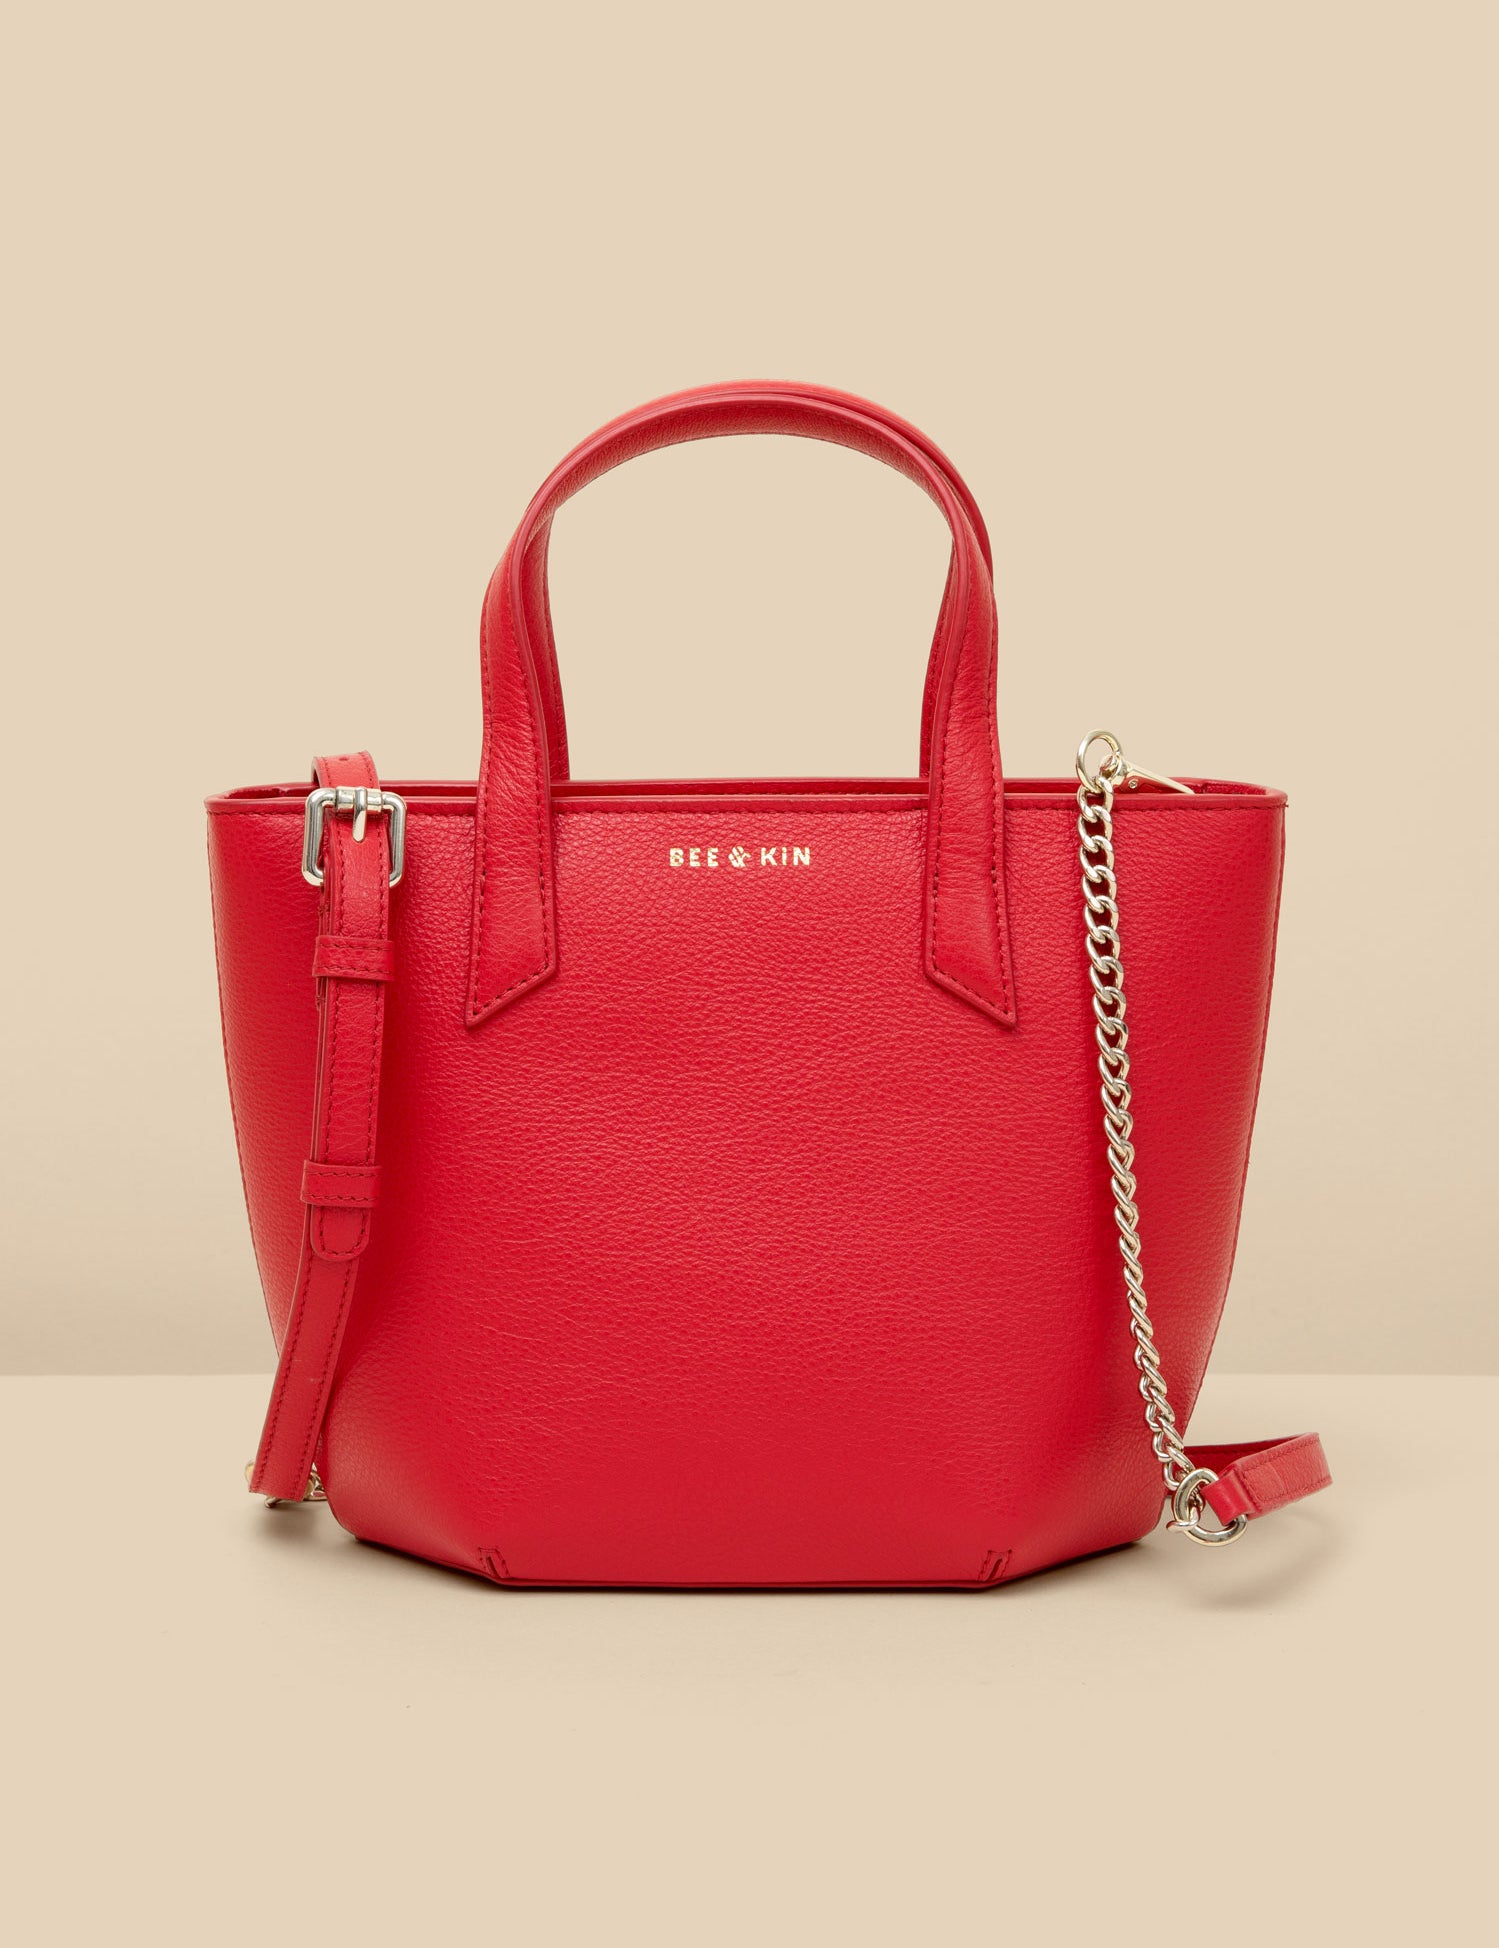 red leather crossbody bag